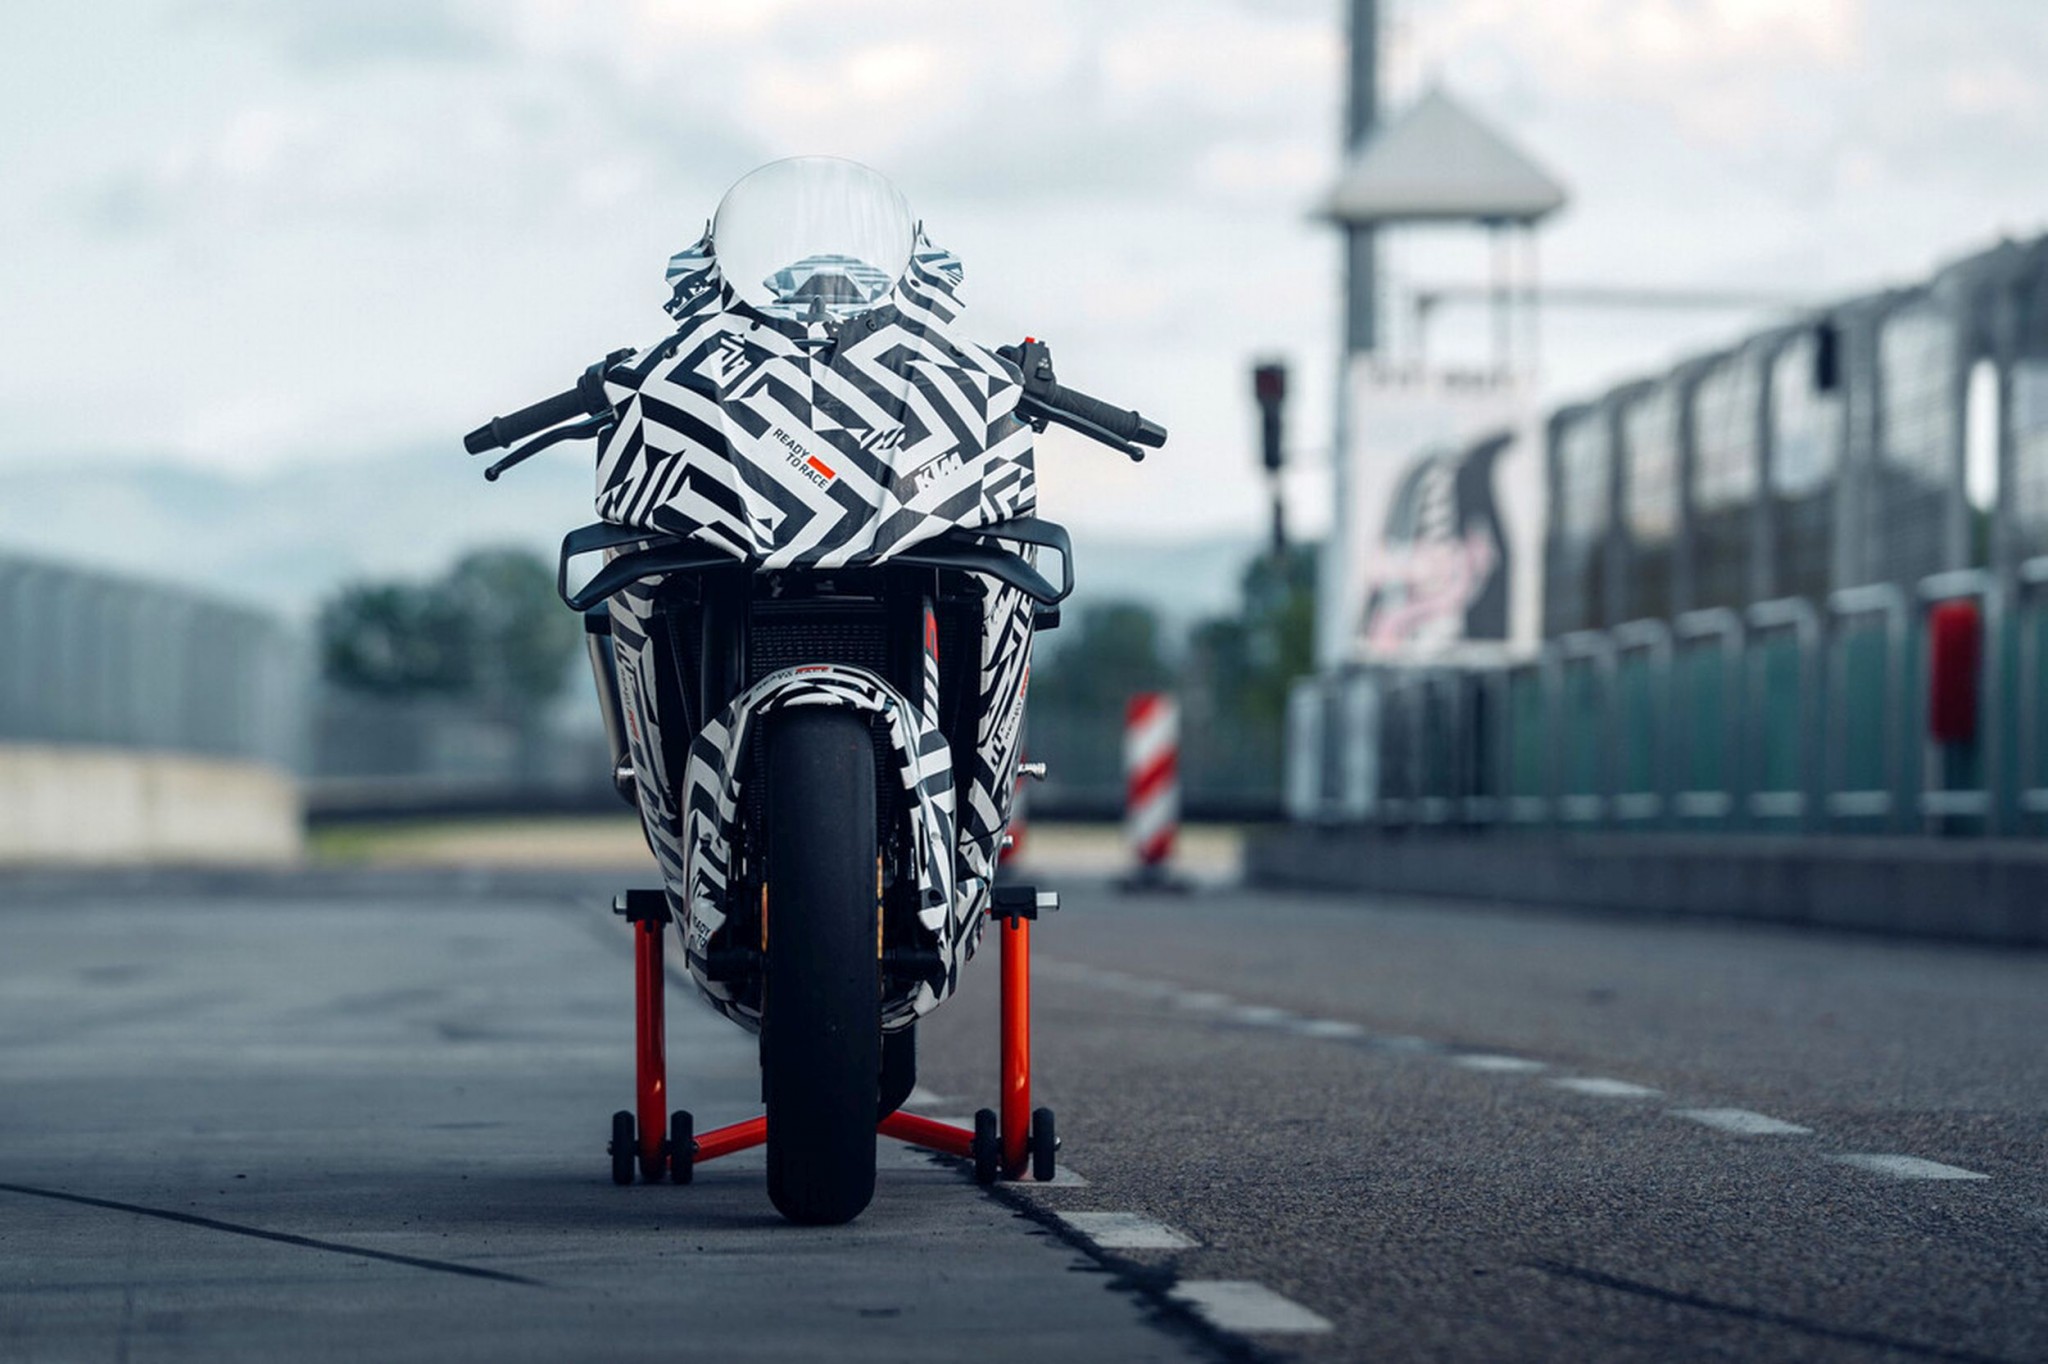 KTM 990 RC R - finally the thoroughbred sports bike for the road! - Image 31